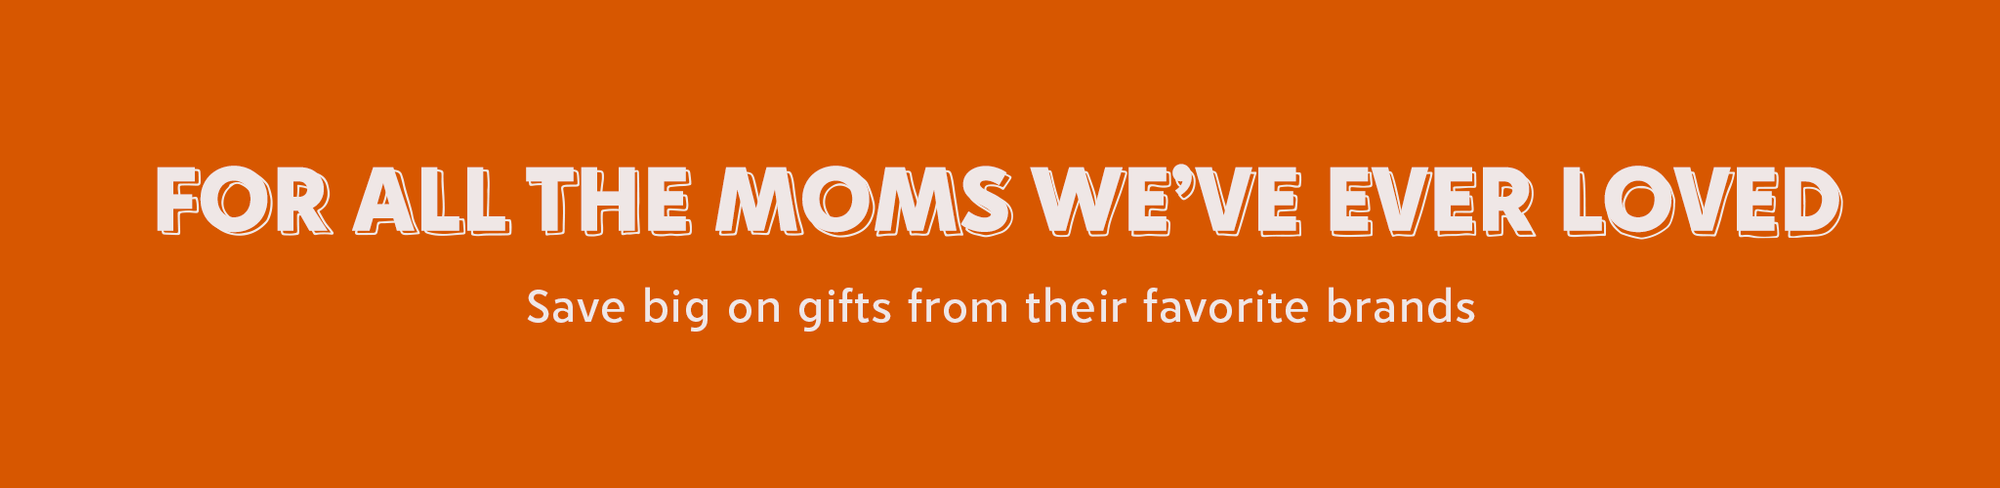 for all the moms we've ever loved - save big on gifts from their favorite brands